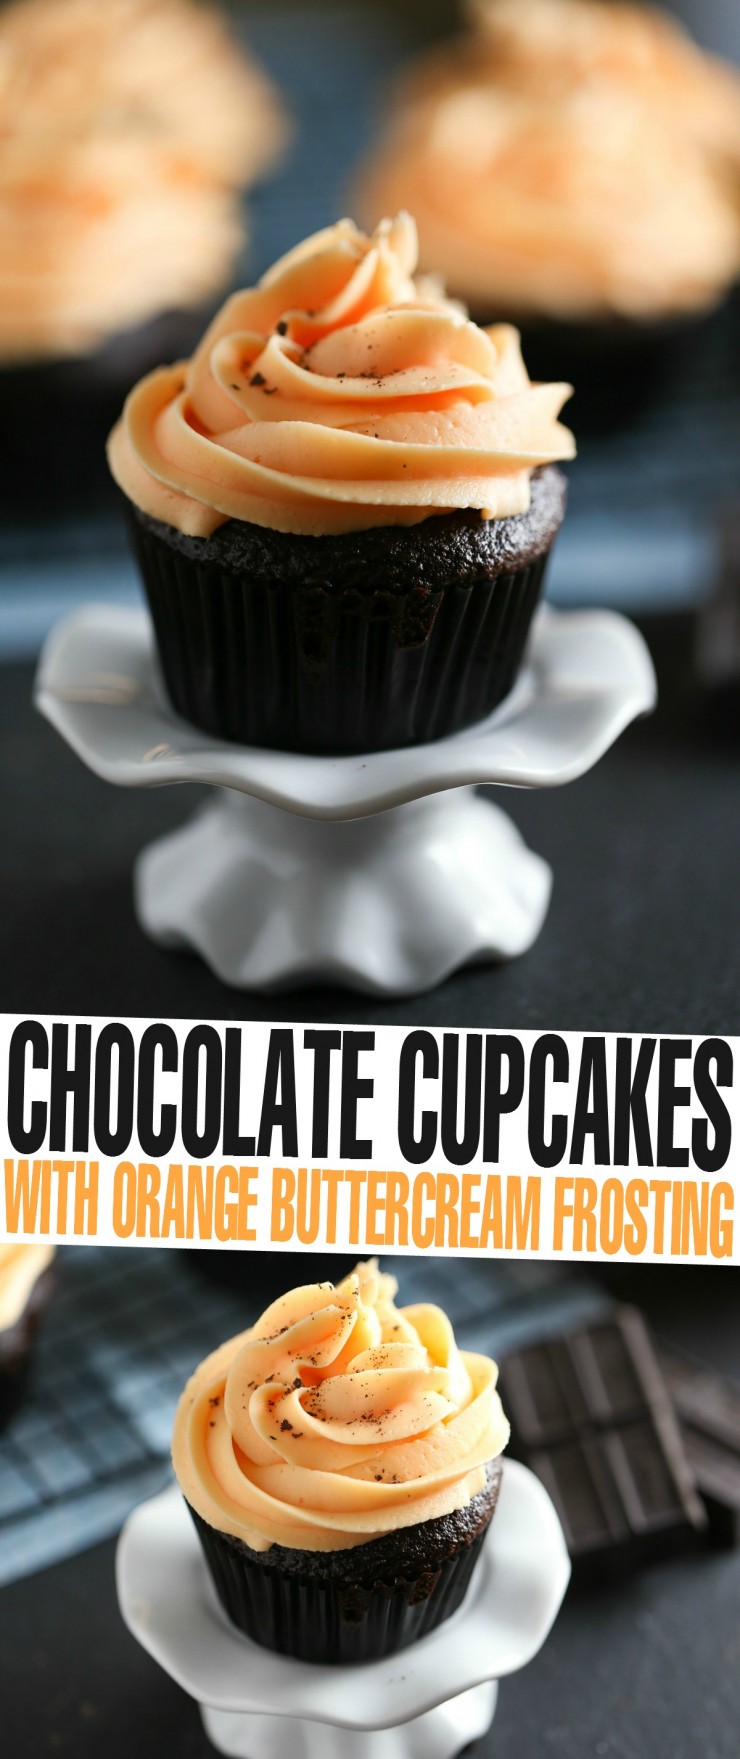 Orange Cupcakes with Chocolate Frosting